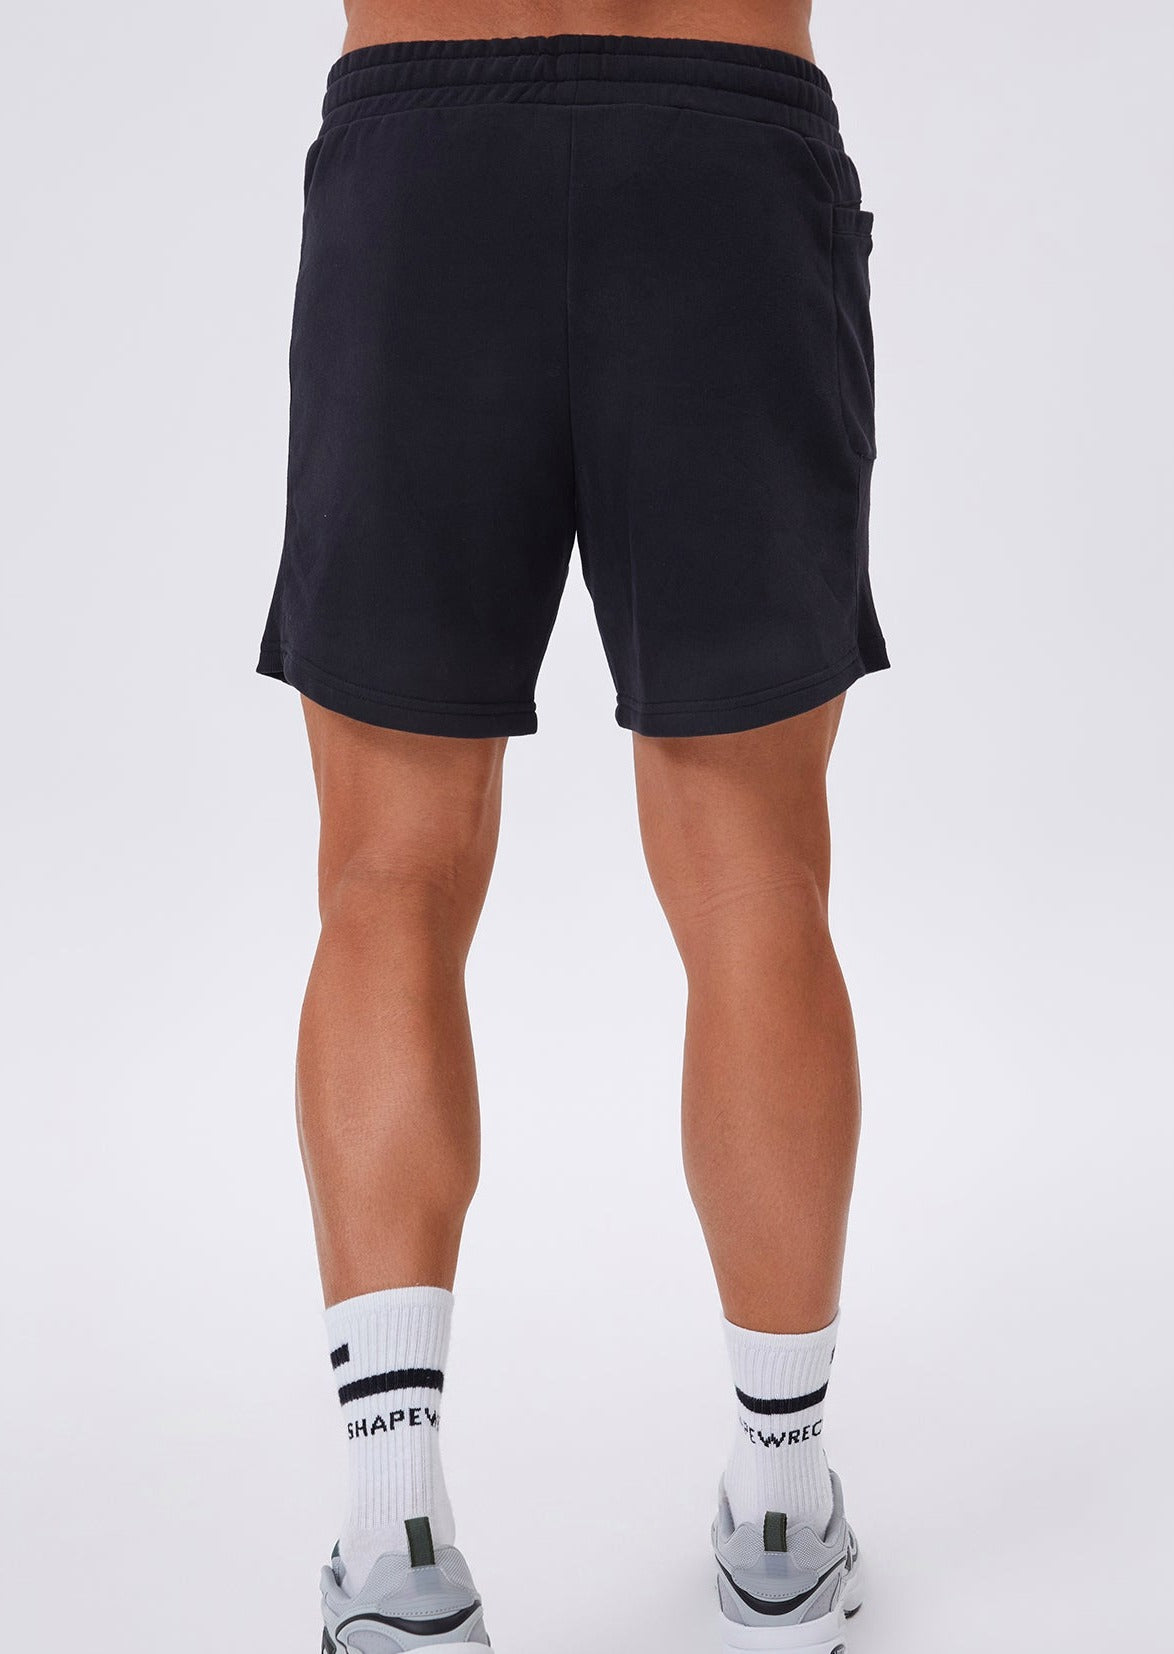 SLIM FIT Shorts PRIMARY SHORT - SPECIAL EDITION IN BLACK